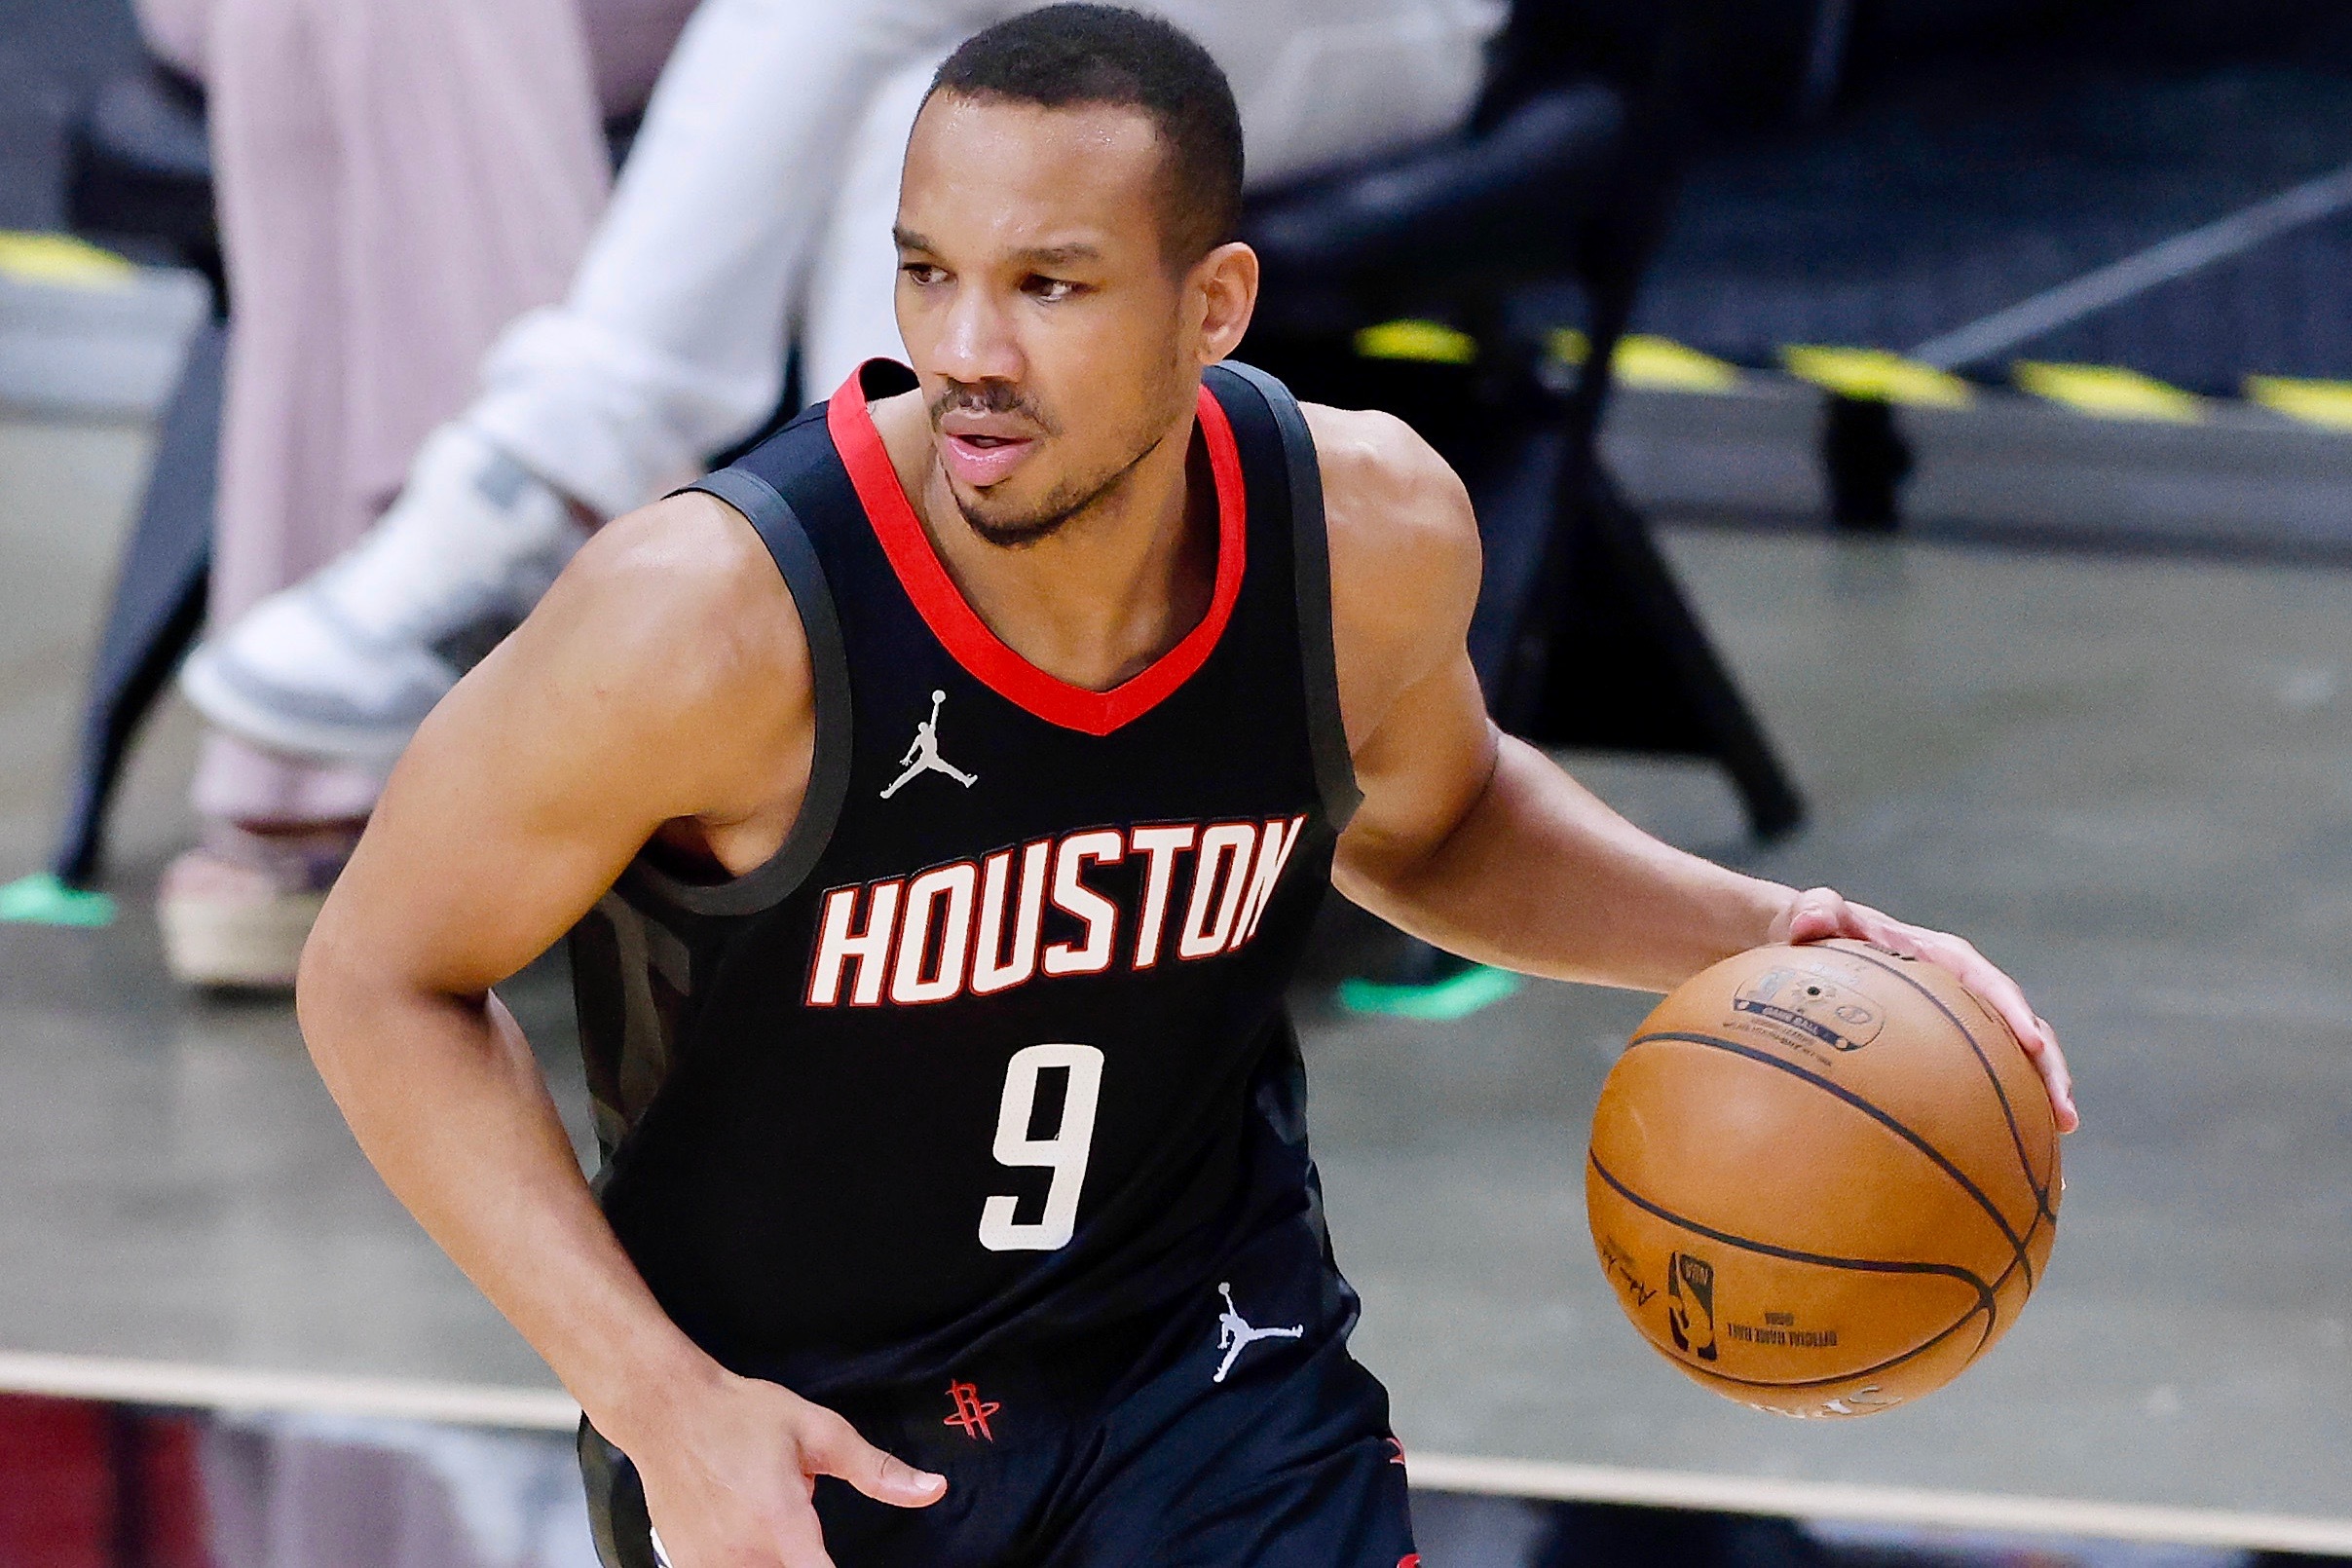 Avery Bradley has been the Lakers' star defender early in training